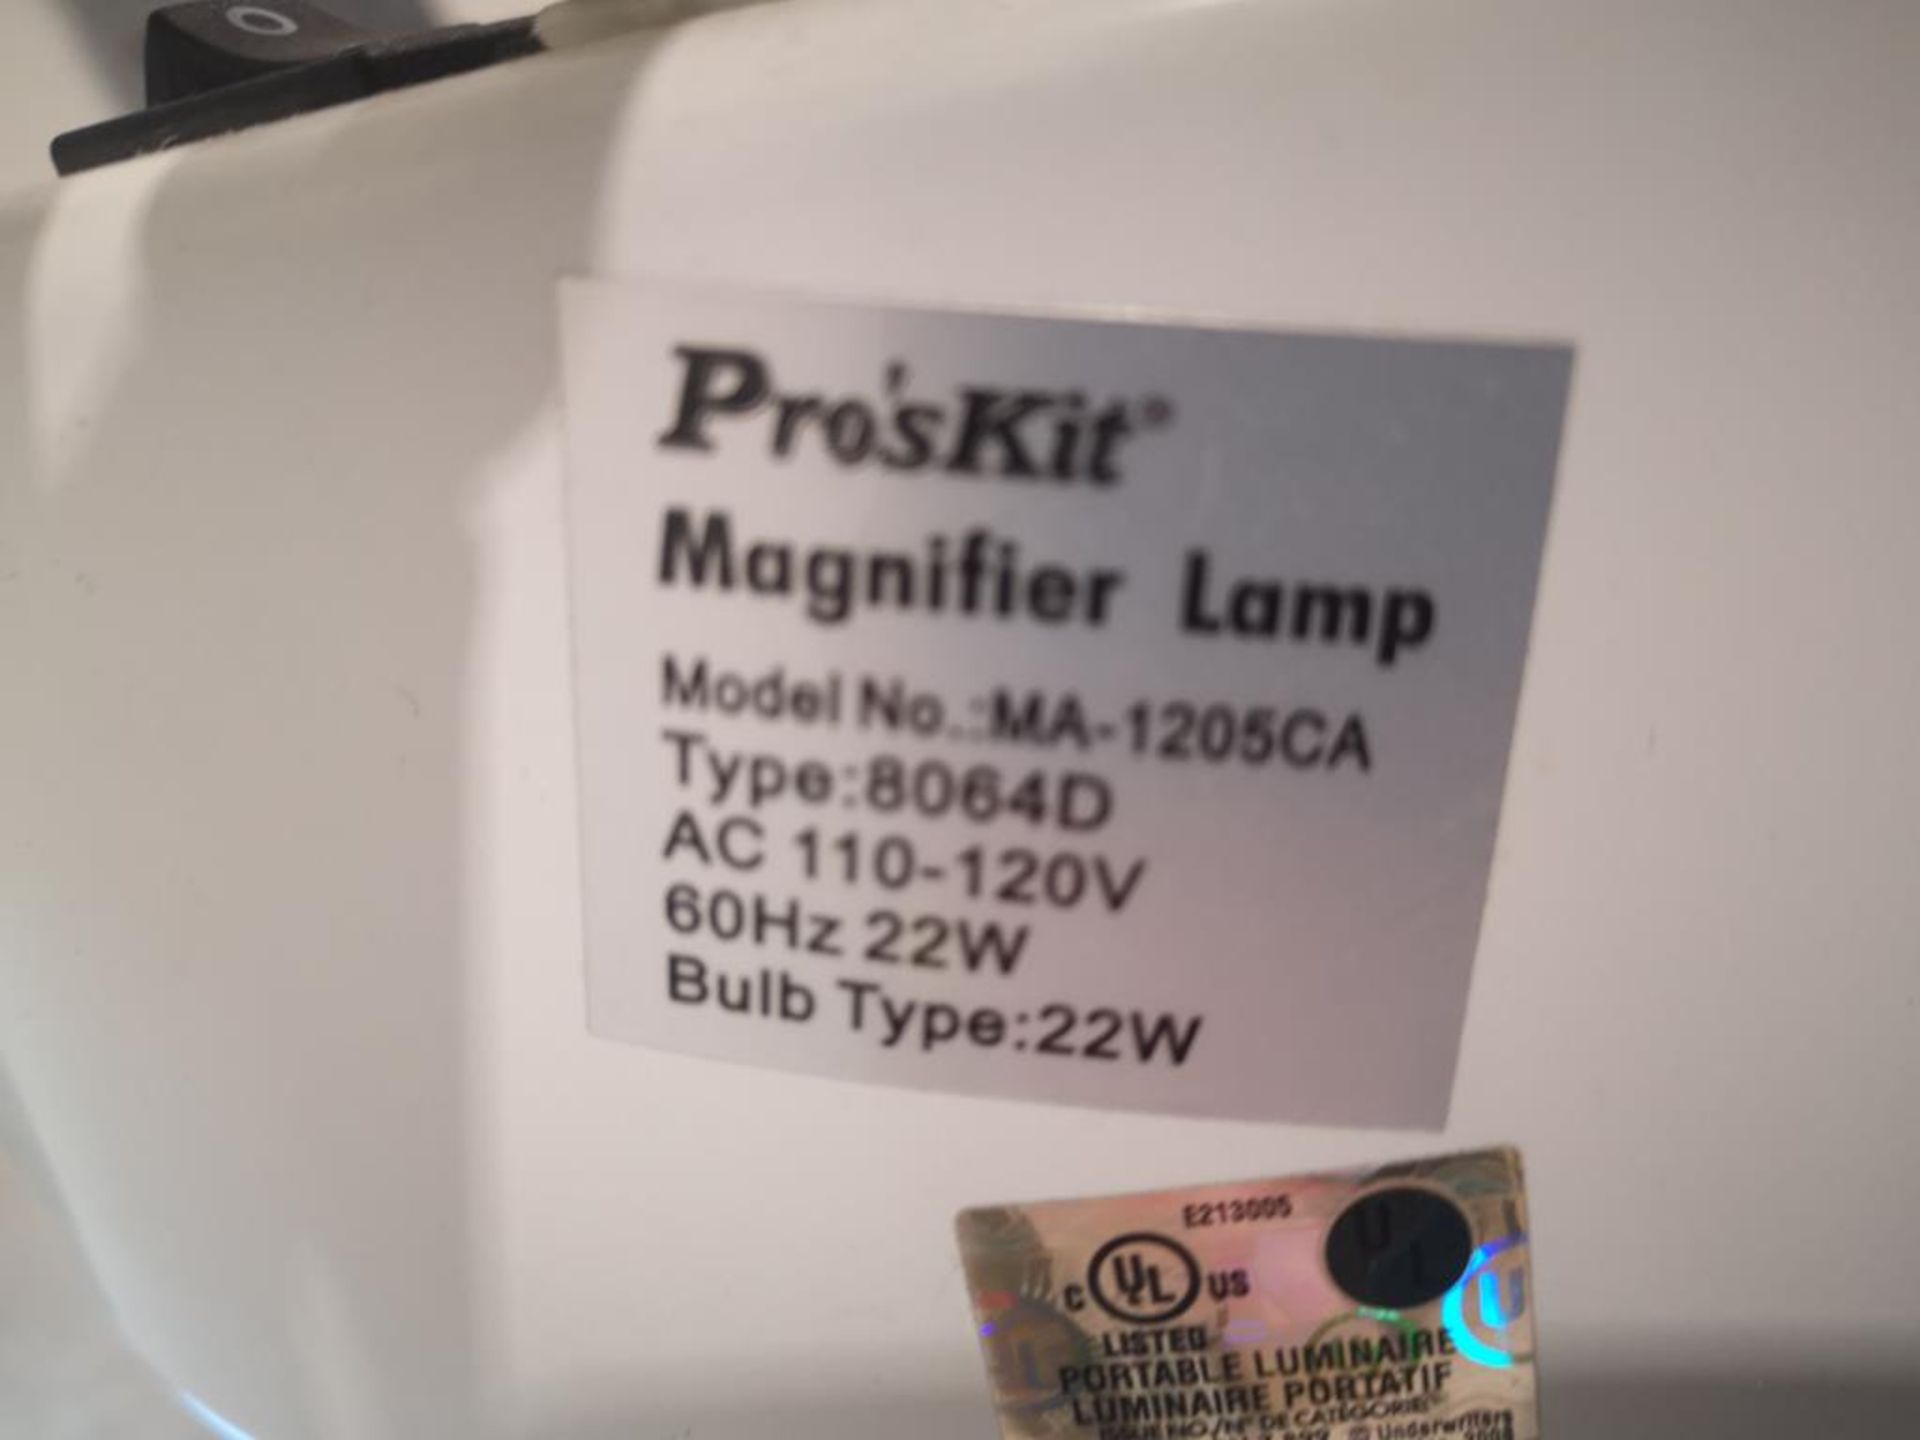 PRO'S KIT, MA-1205CA, 8064D, 4" DIA. MAGNIFIER WORKBENCH LAMP, 110 VAC 22 W - Image 2 of 2